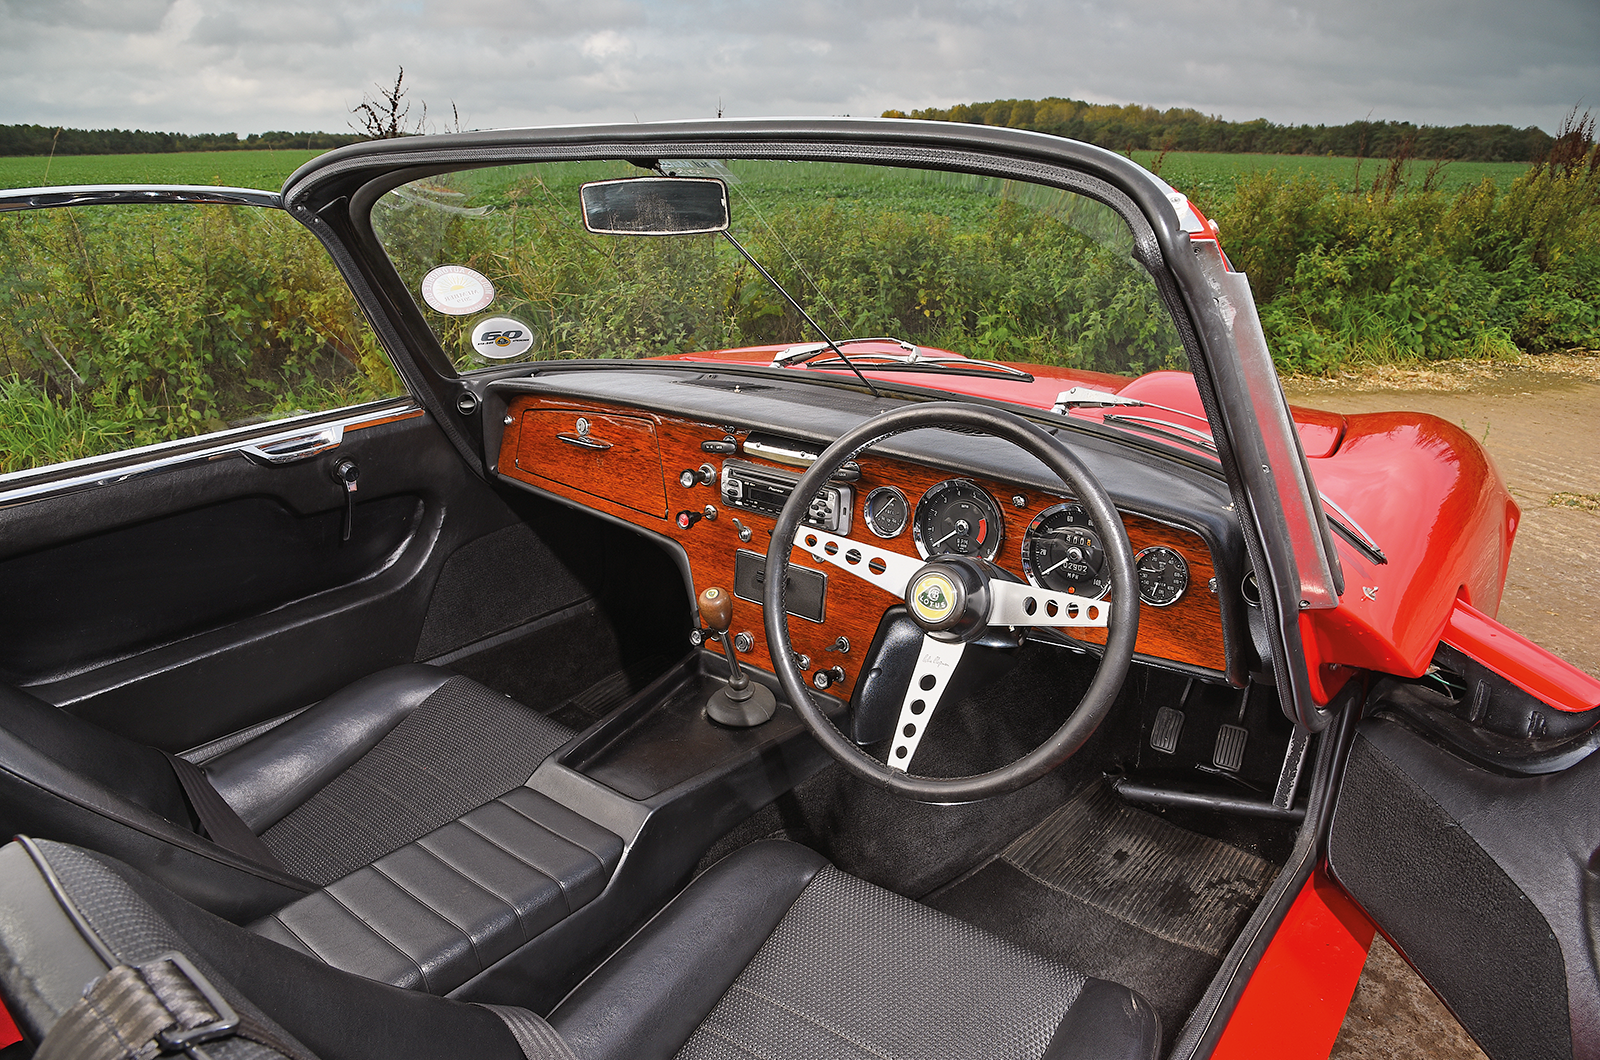 The Lotus Elan’s cabin is more luxurious than you might expect